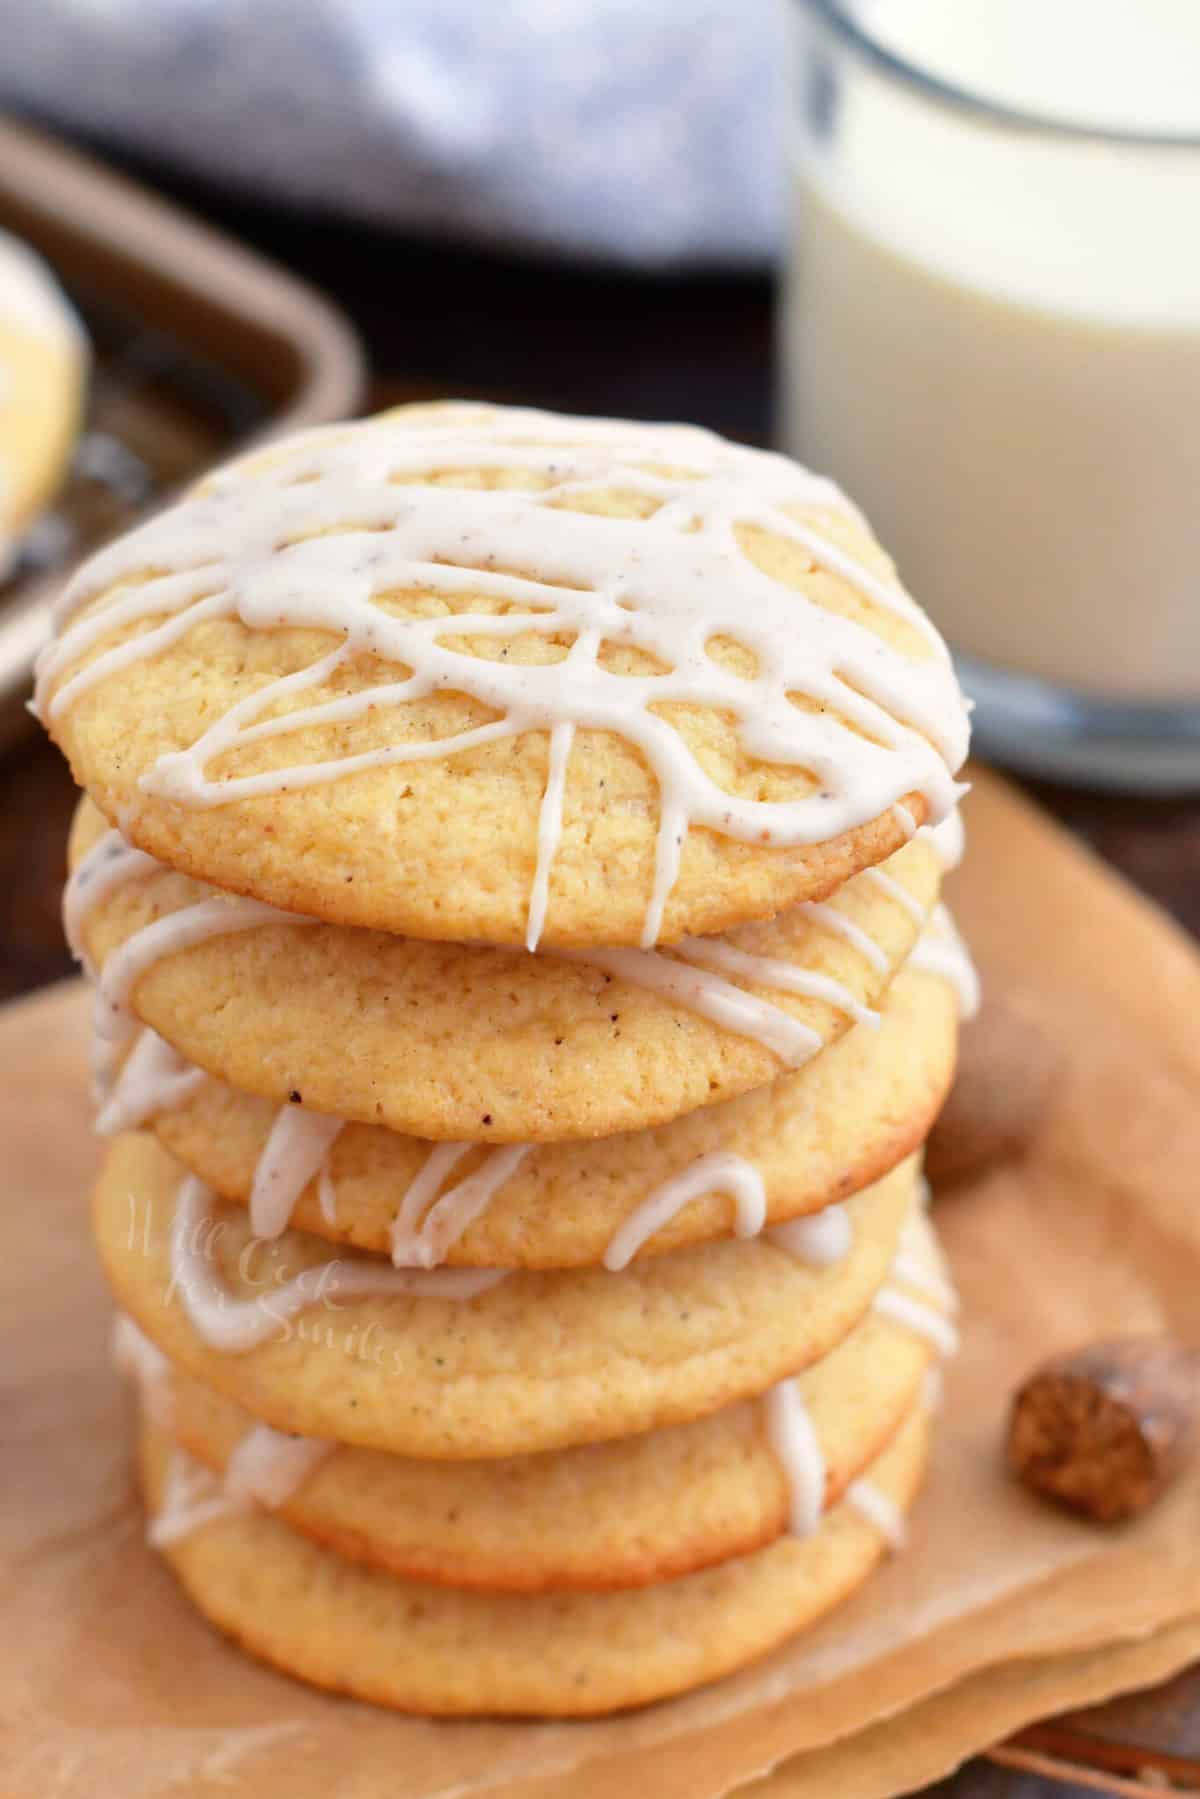 Eggnog Cookies - Learn How To Make These Soft Holiday Cookies